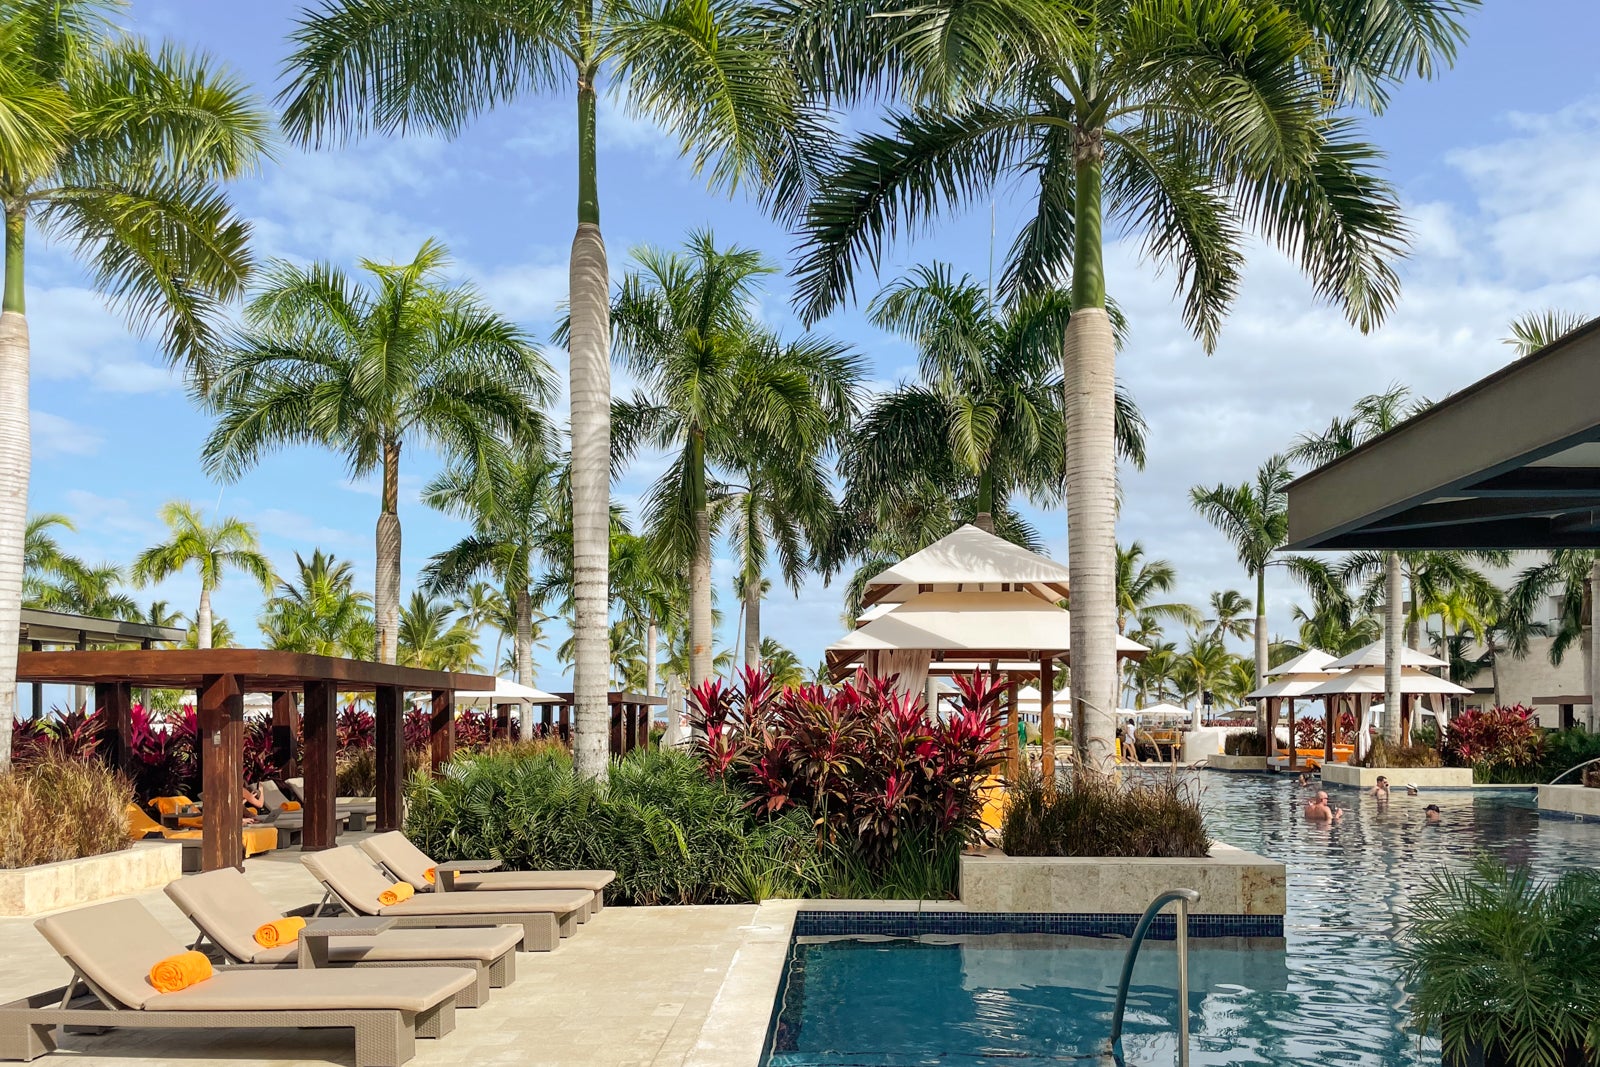 7 things to know before booking a stay at the Hyatt Zilara Cap Cana